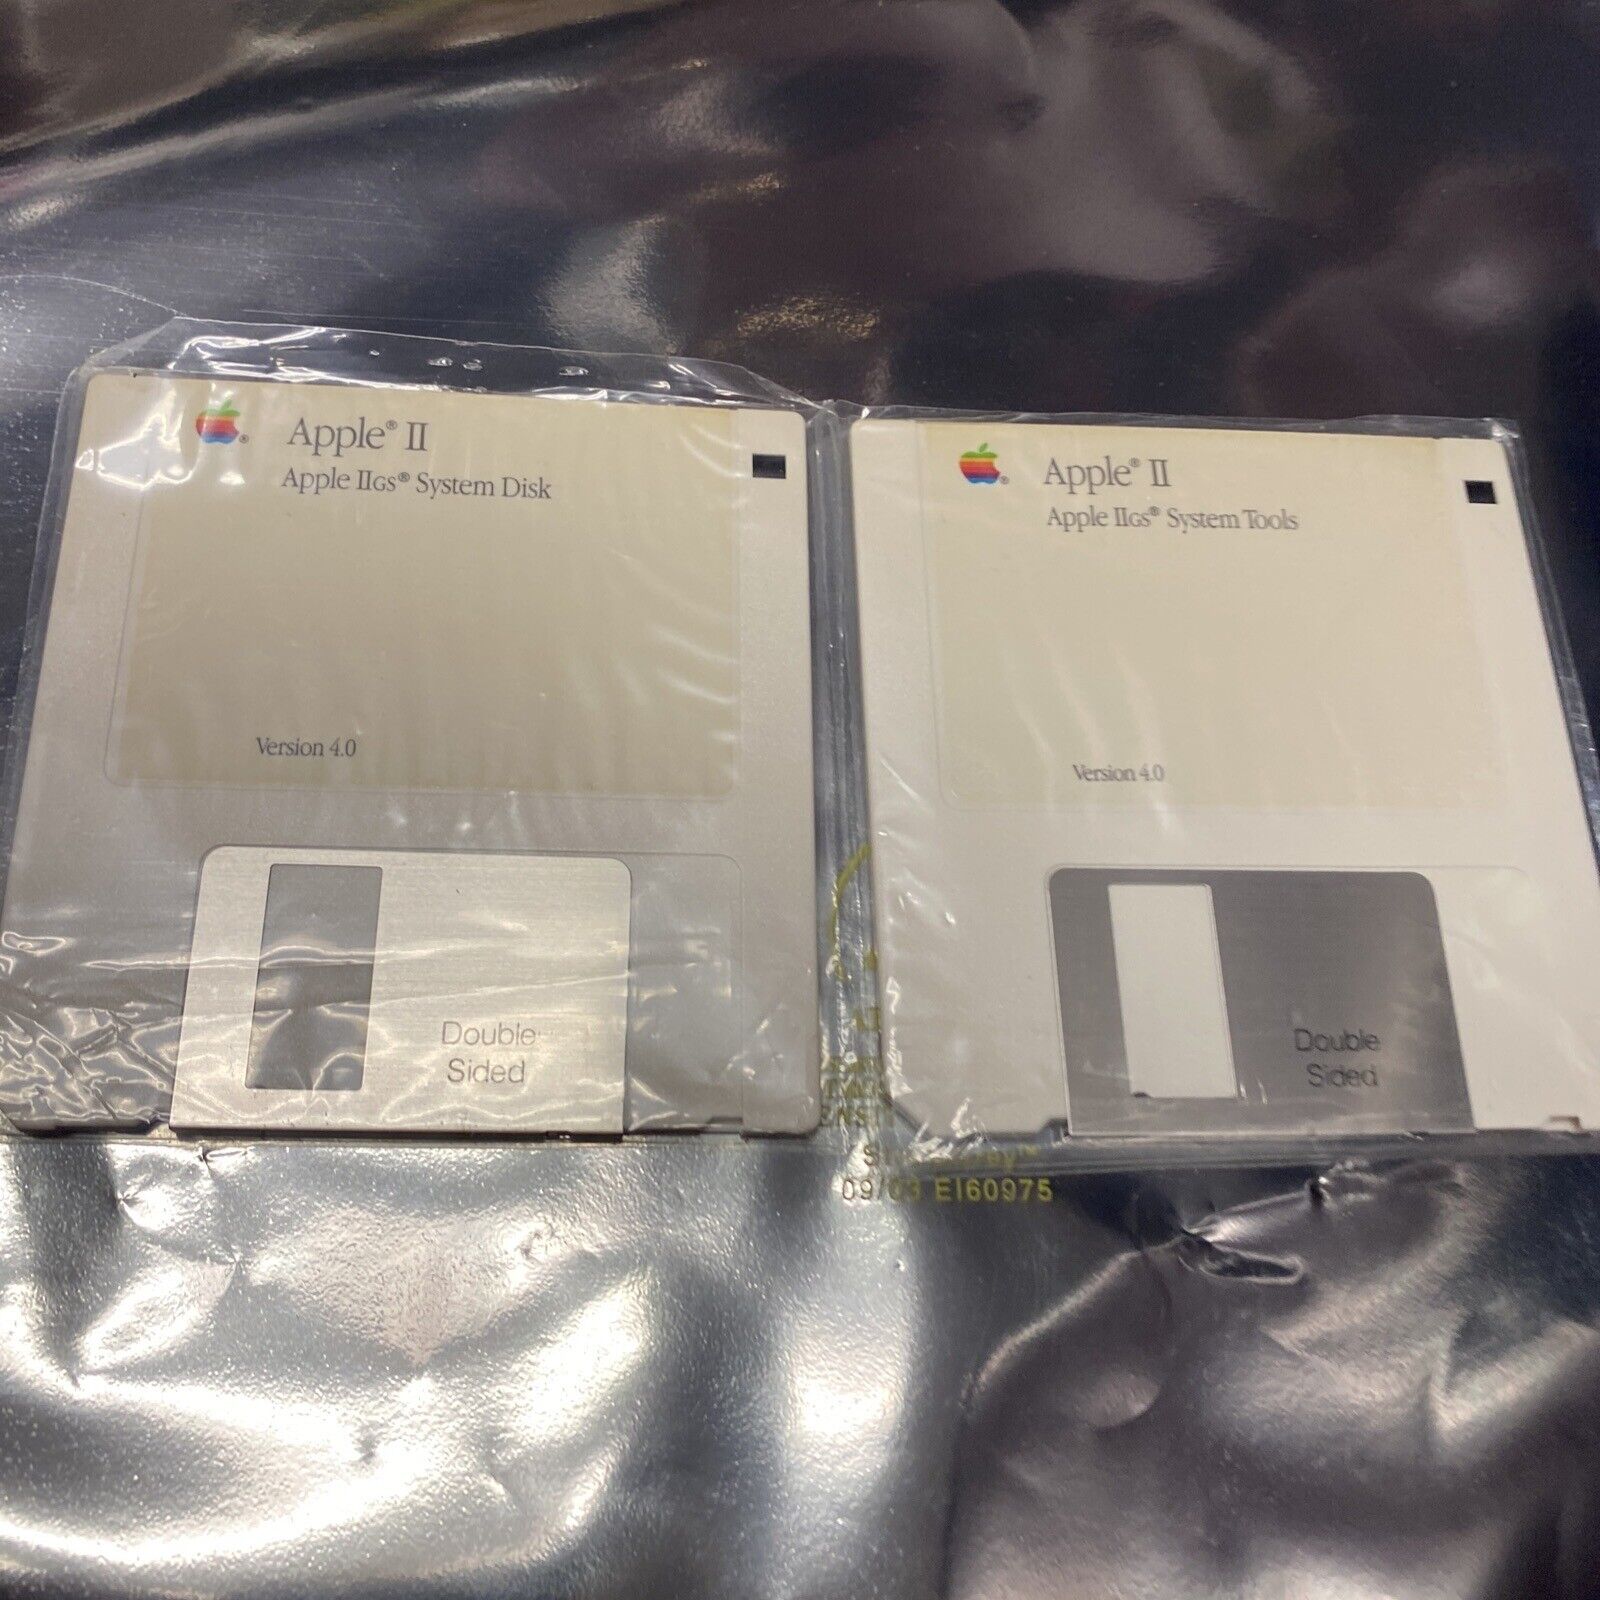 1988 Apple IIGS System Tools And System Disk Version 4.0 3.5 Floppy Disks